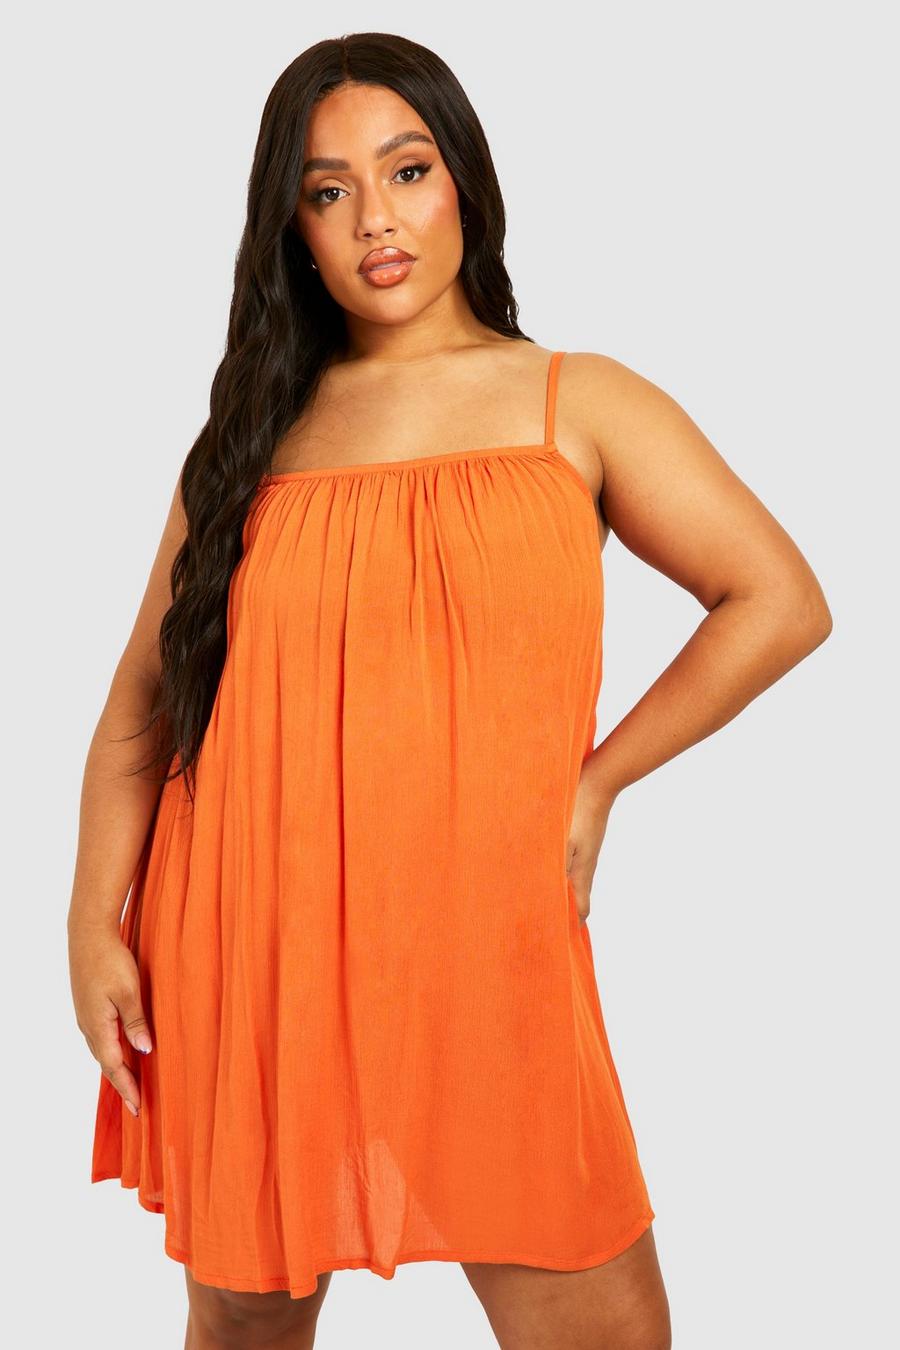 These  Summer Plus Size Dresses Are Perfect For A Staycation